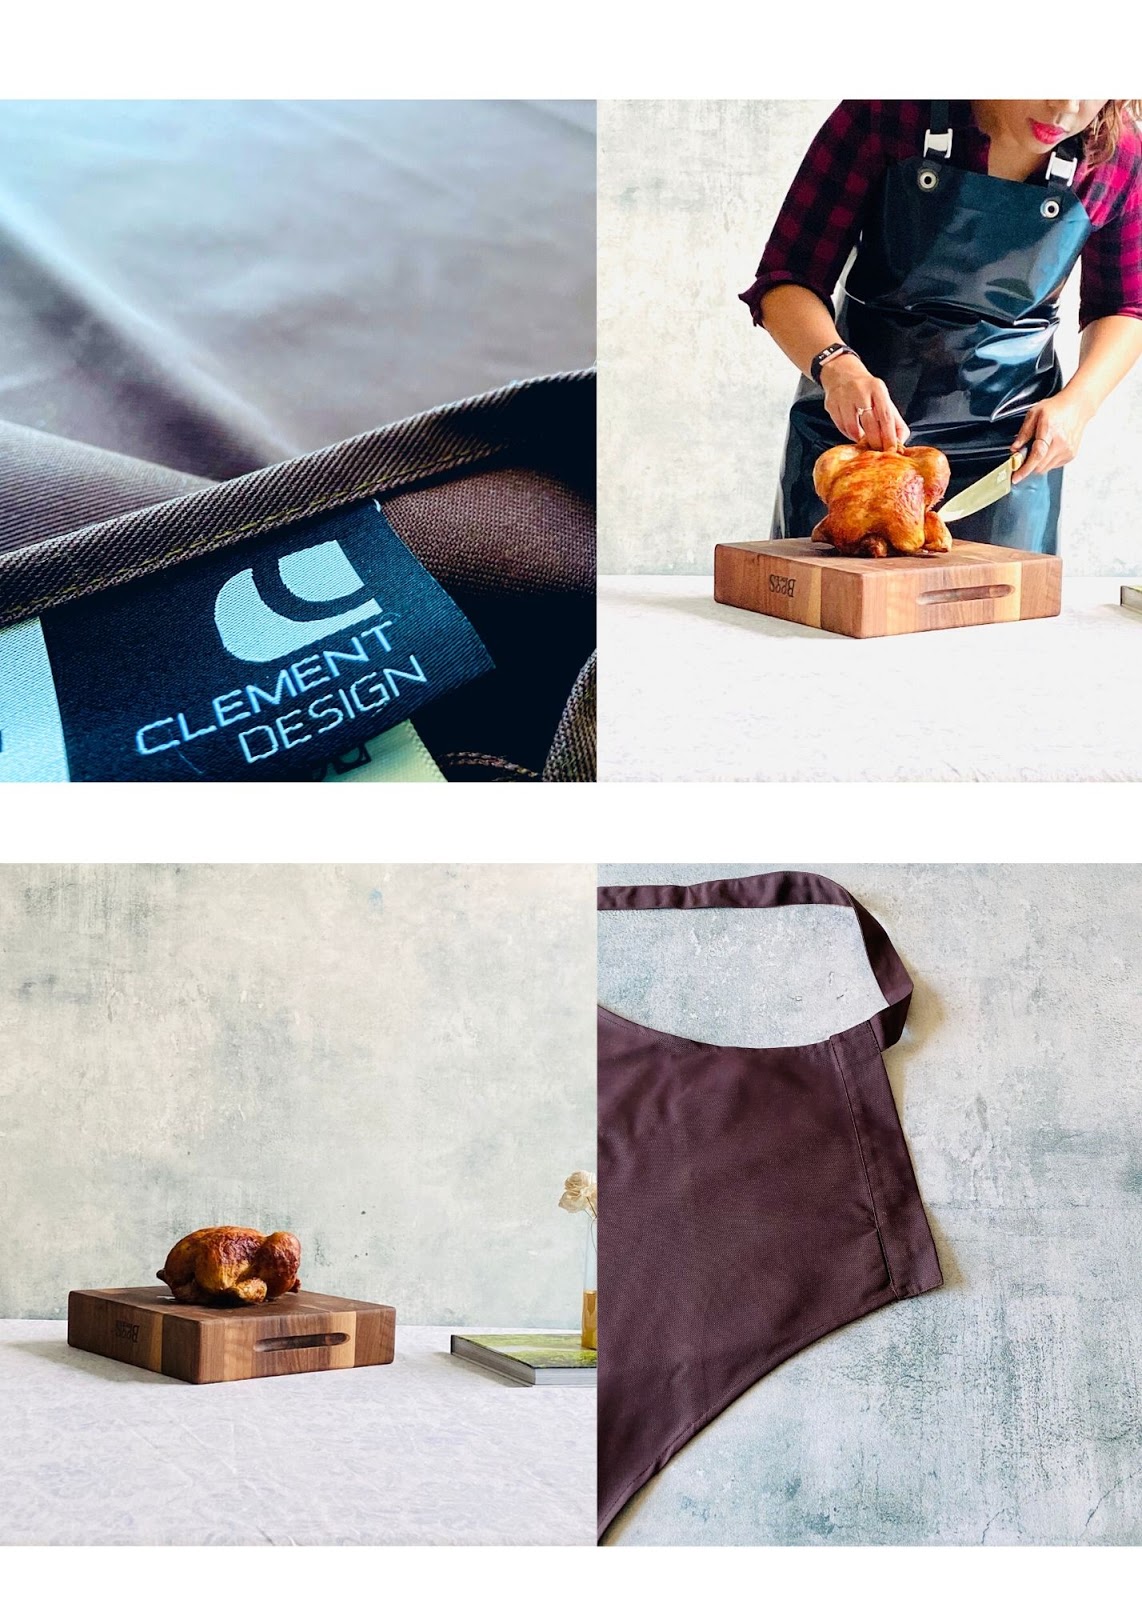 Best French Aprons - Clement Design